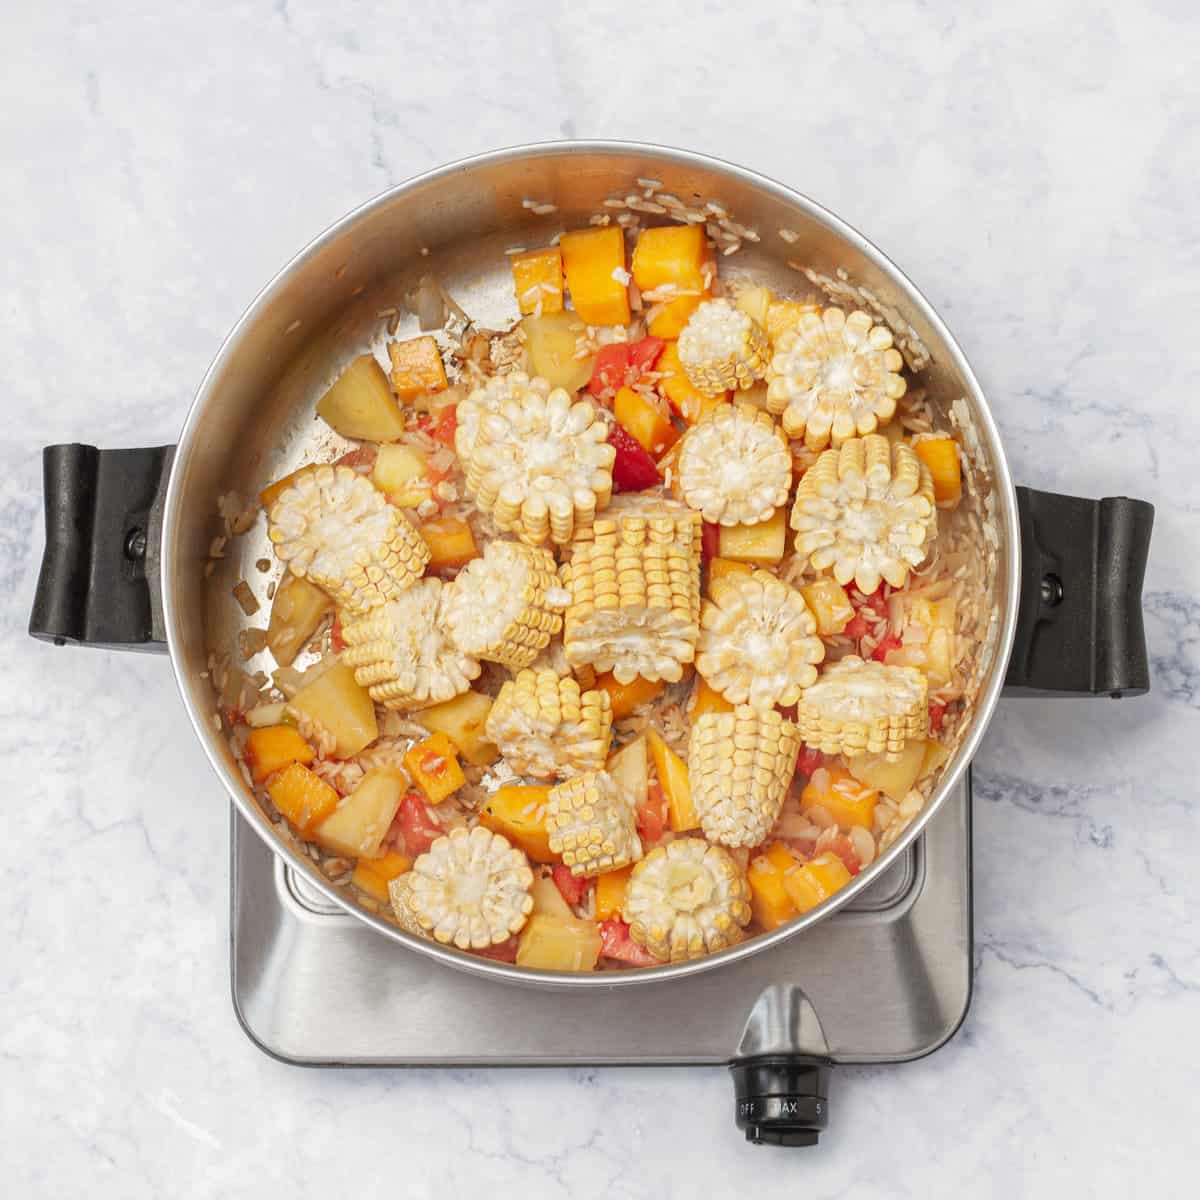 Add corn to cooked vegetables